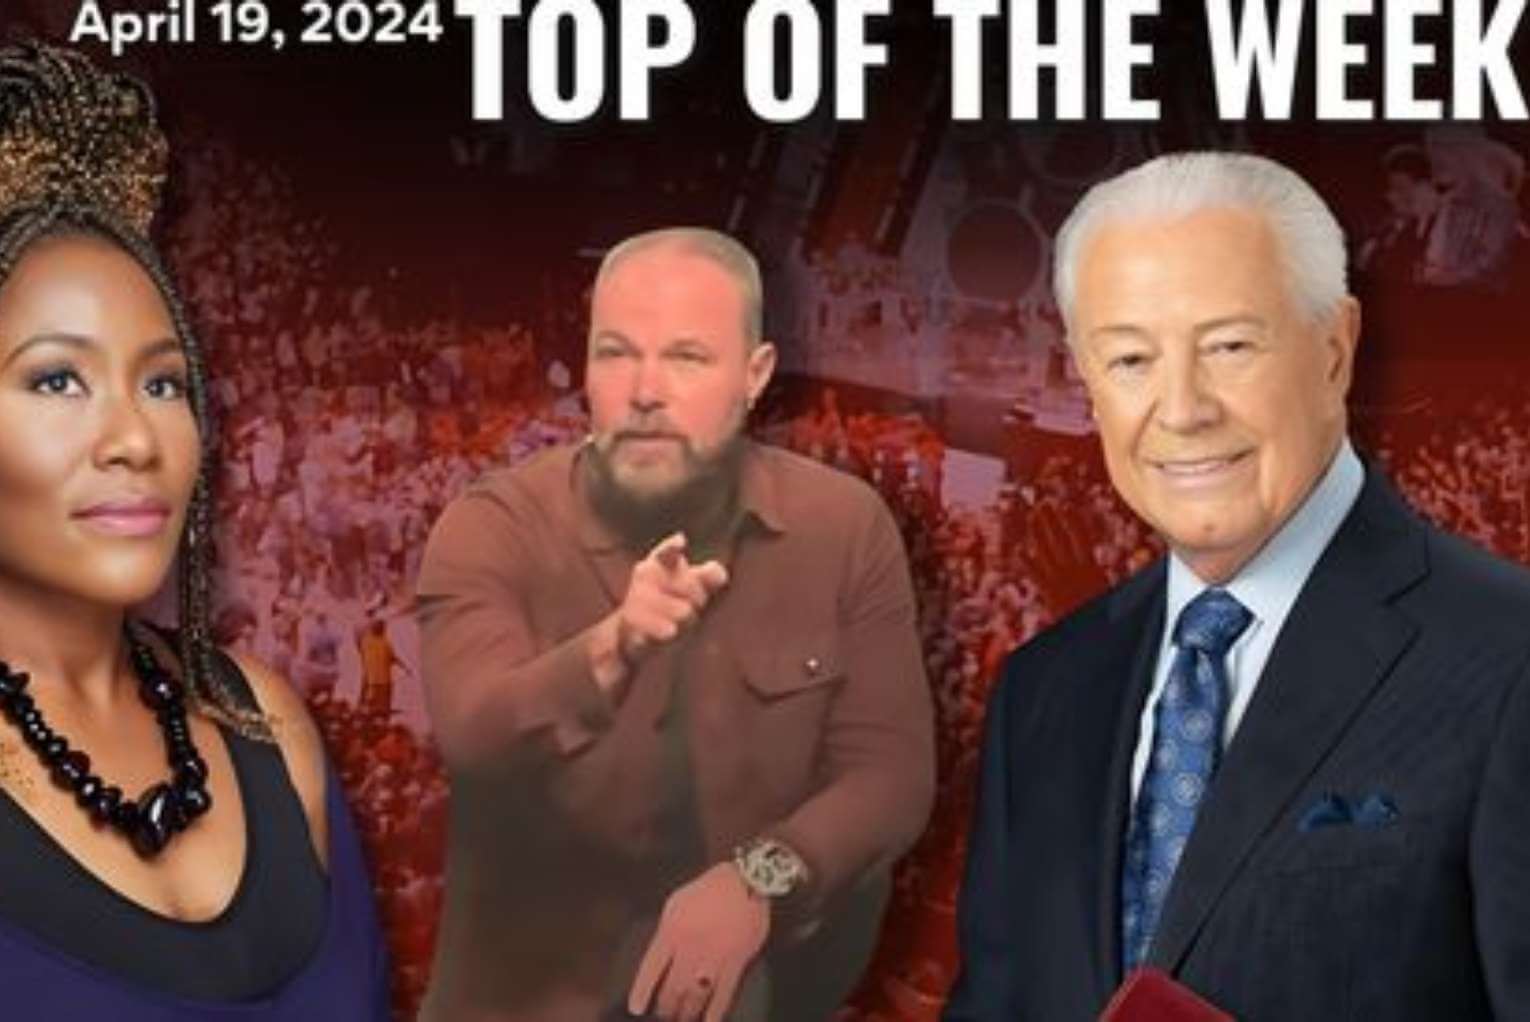 Top of the Week: Megachurch Scandal Erupts at Iconic Gathering